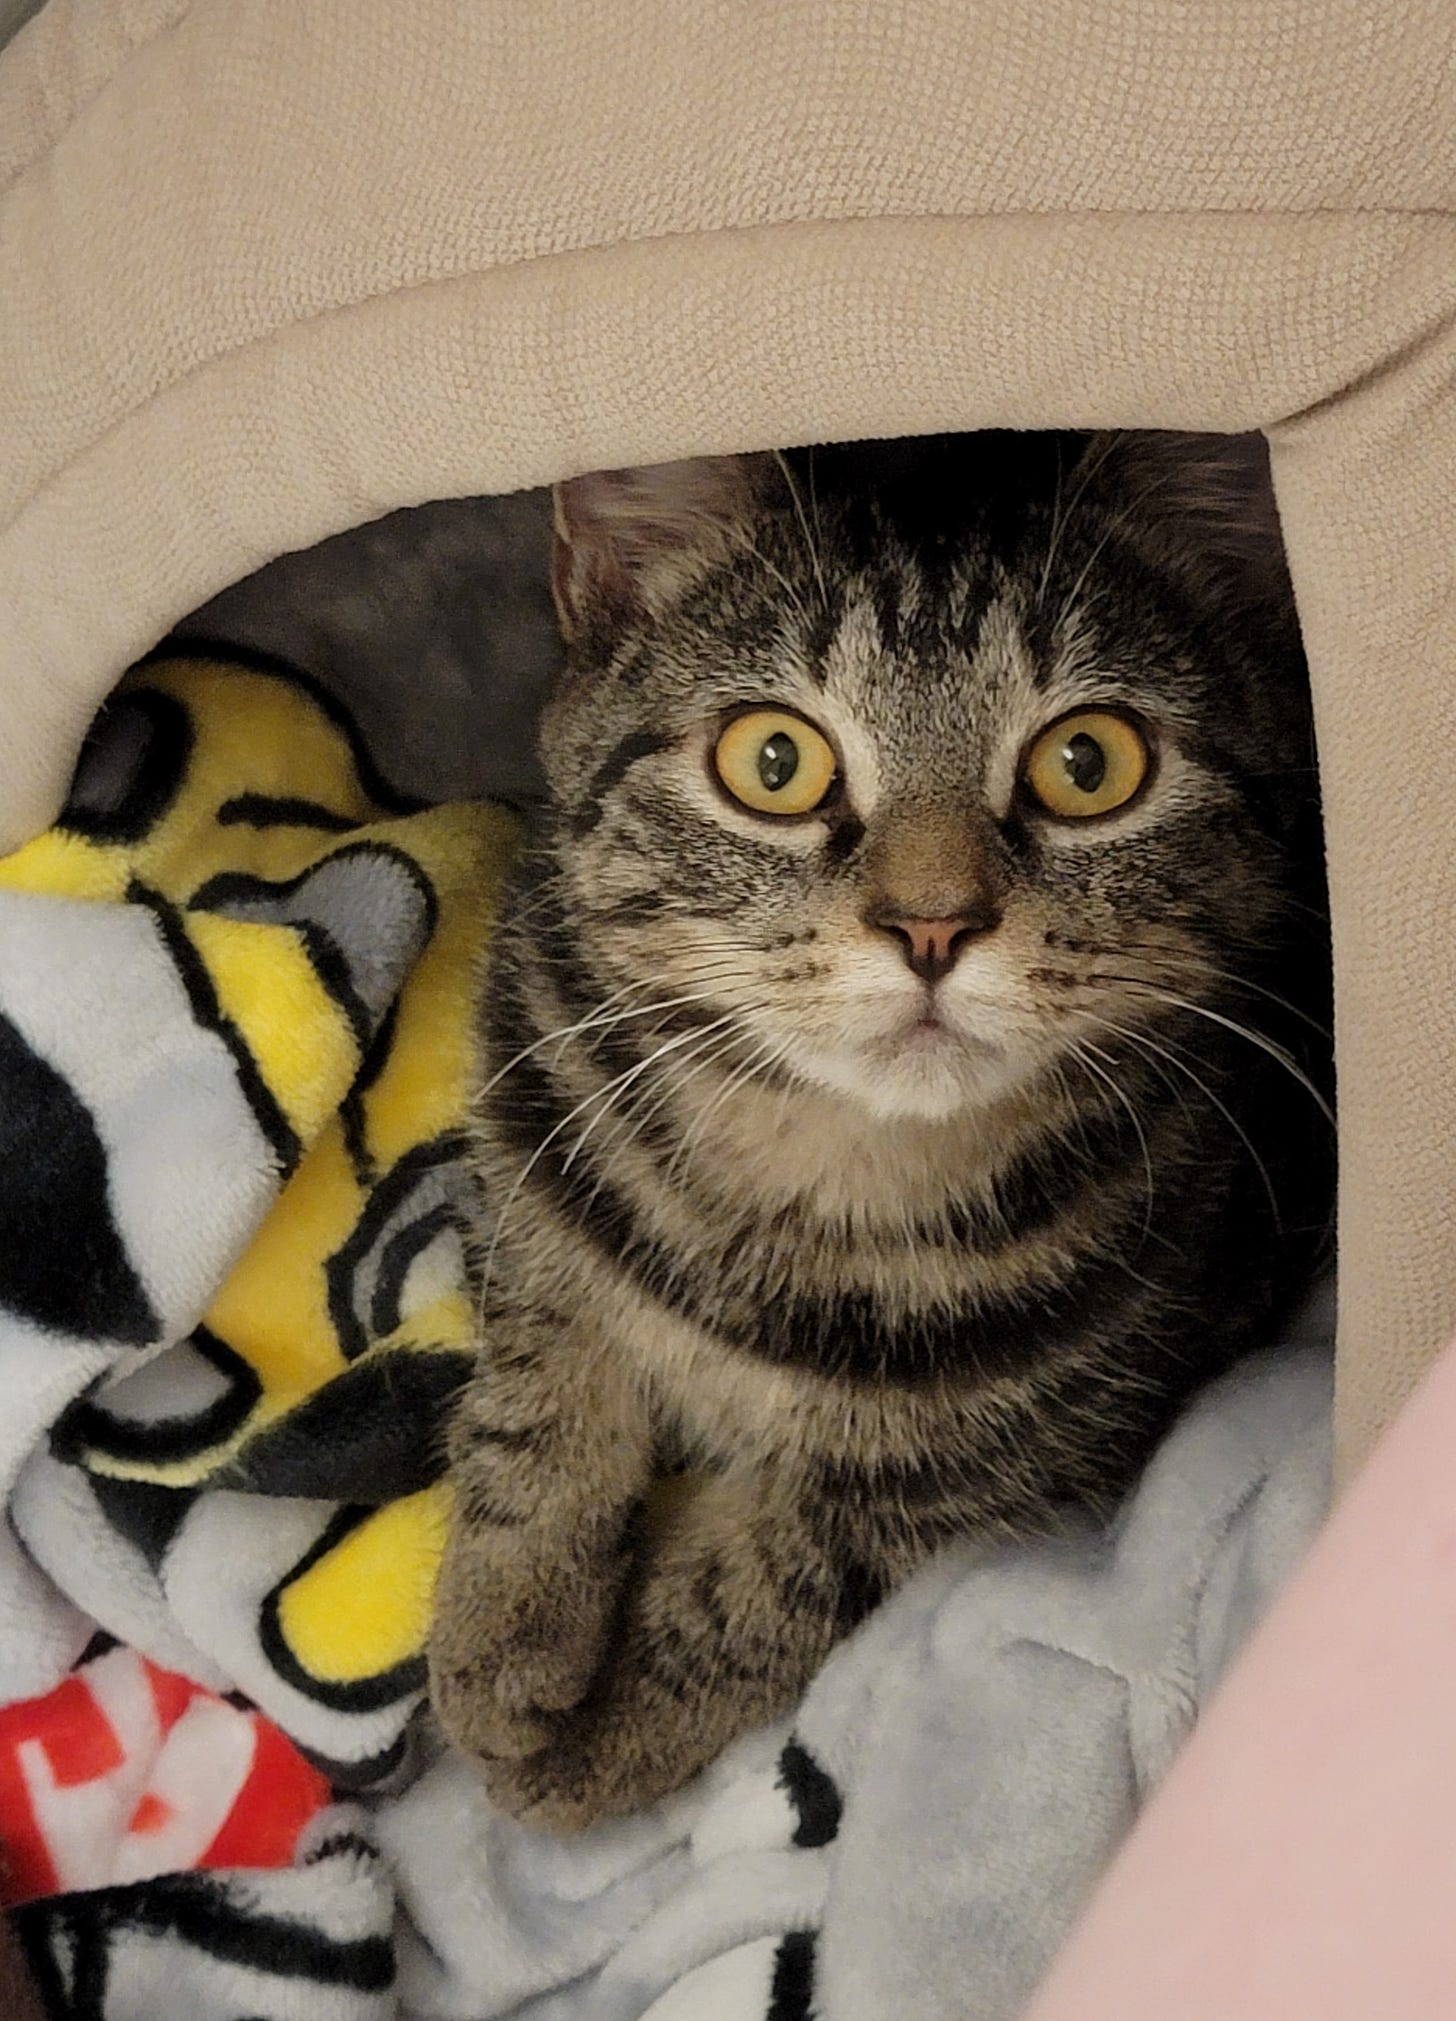 A tabby kitten with yellow eyes opened wide looking at the camera. It's laying in a tan cat house on top of a multi-colored blanket.